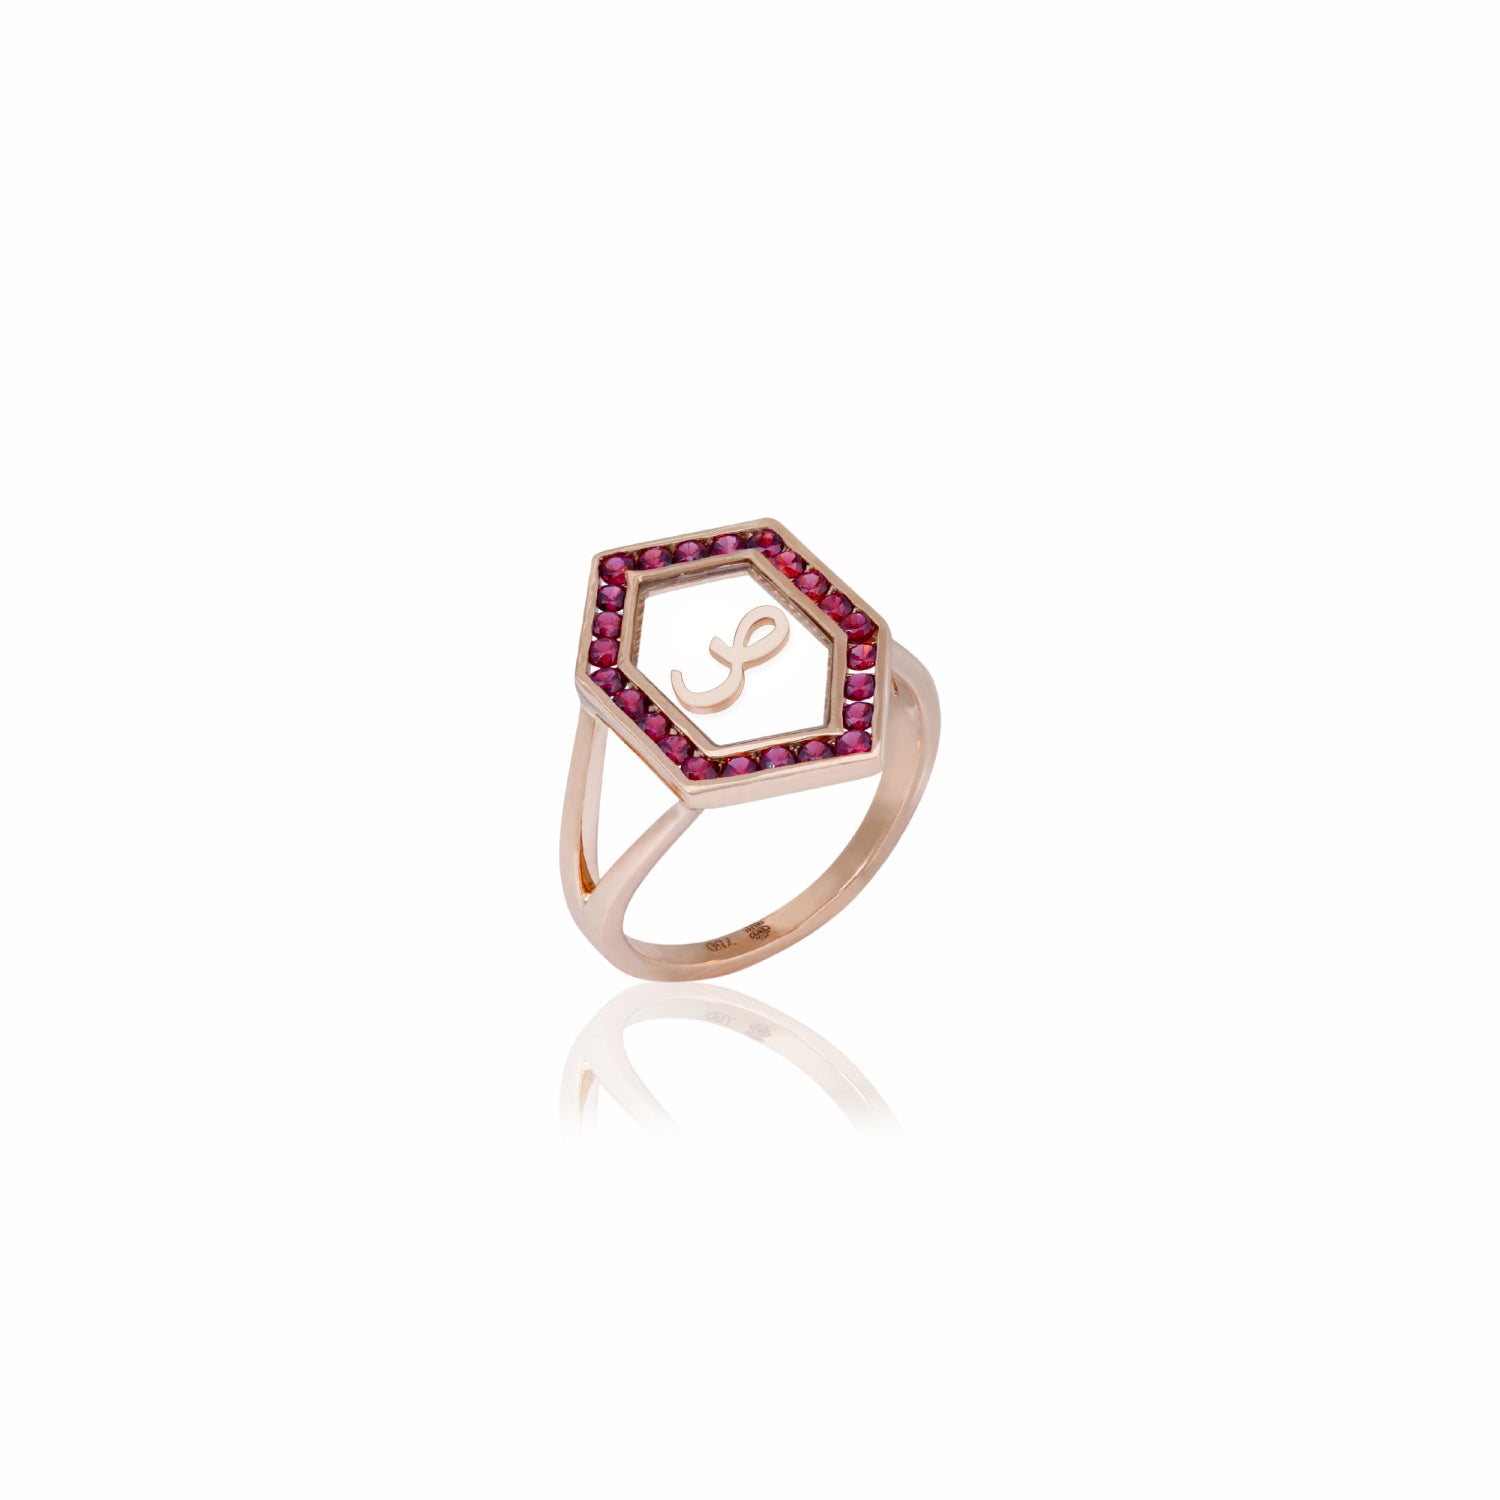 Qamoos 1.0 Letter ص Ruby Ring in Rose Gold